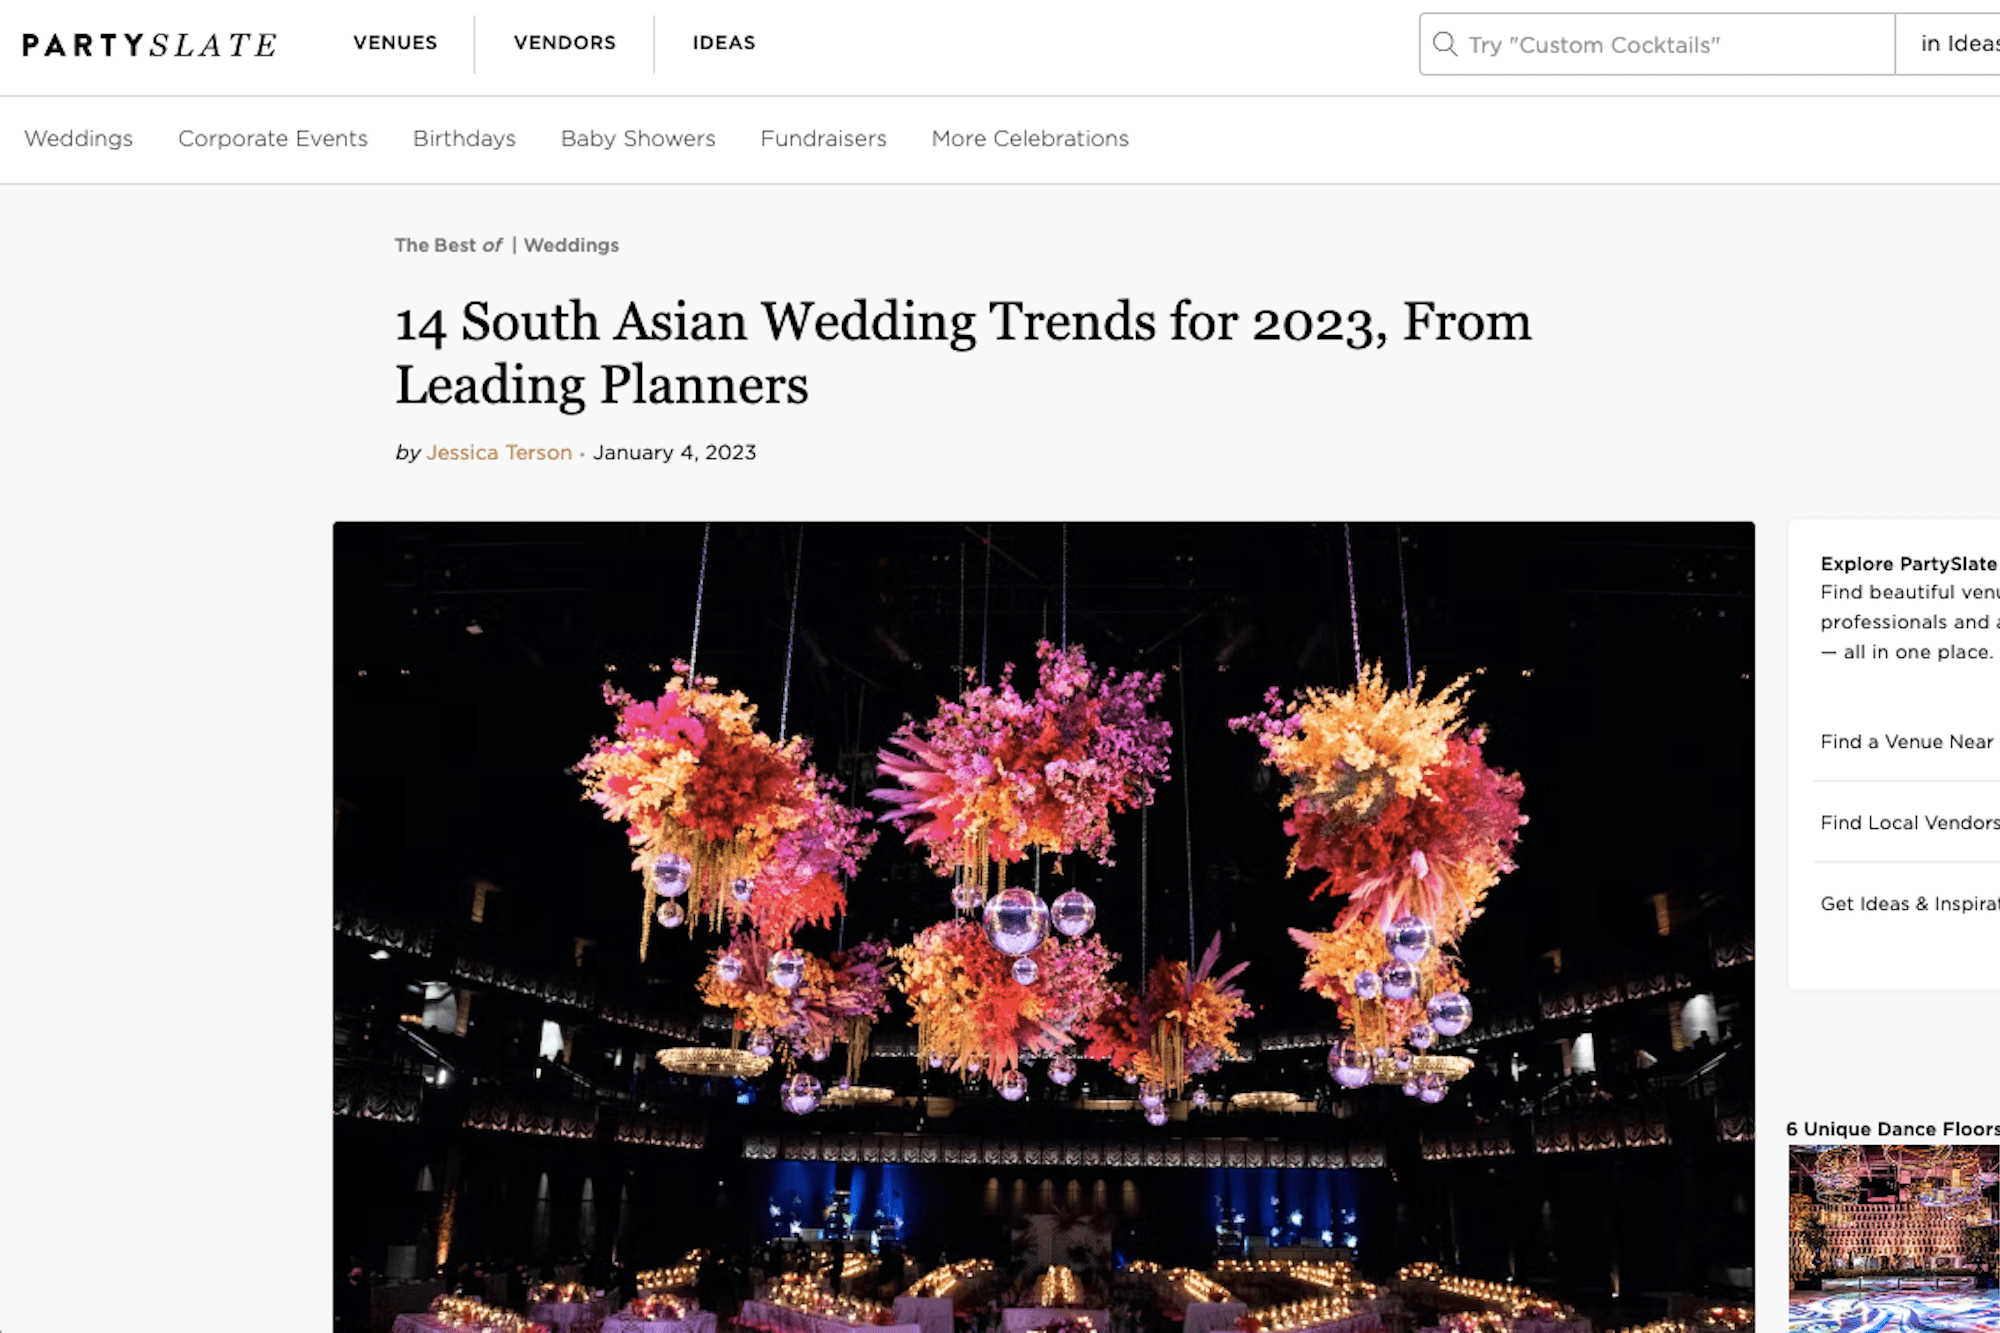 14 South Asian Wedding Trends for 2023